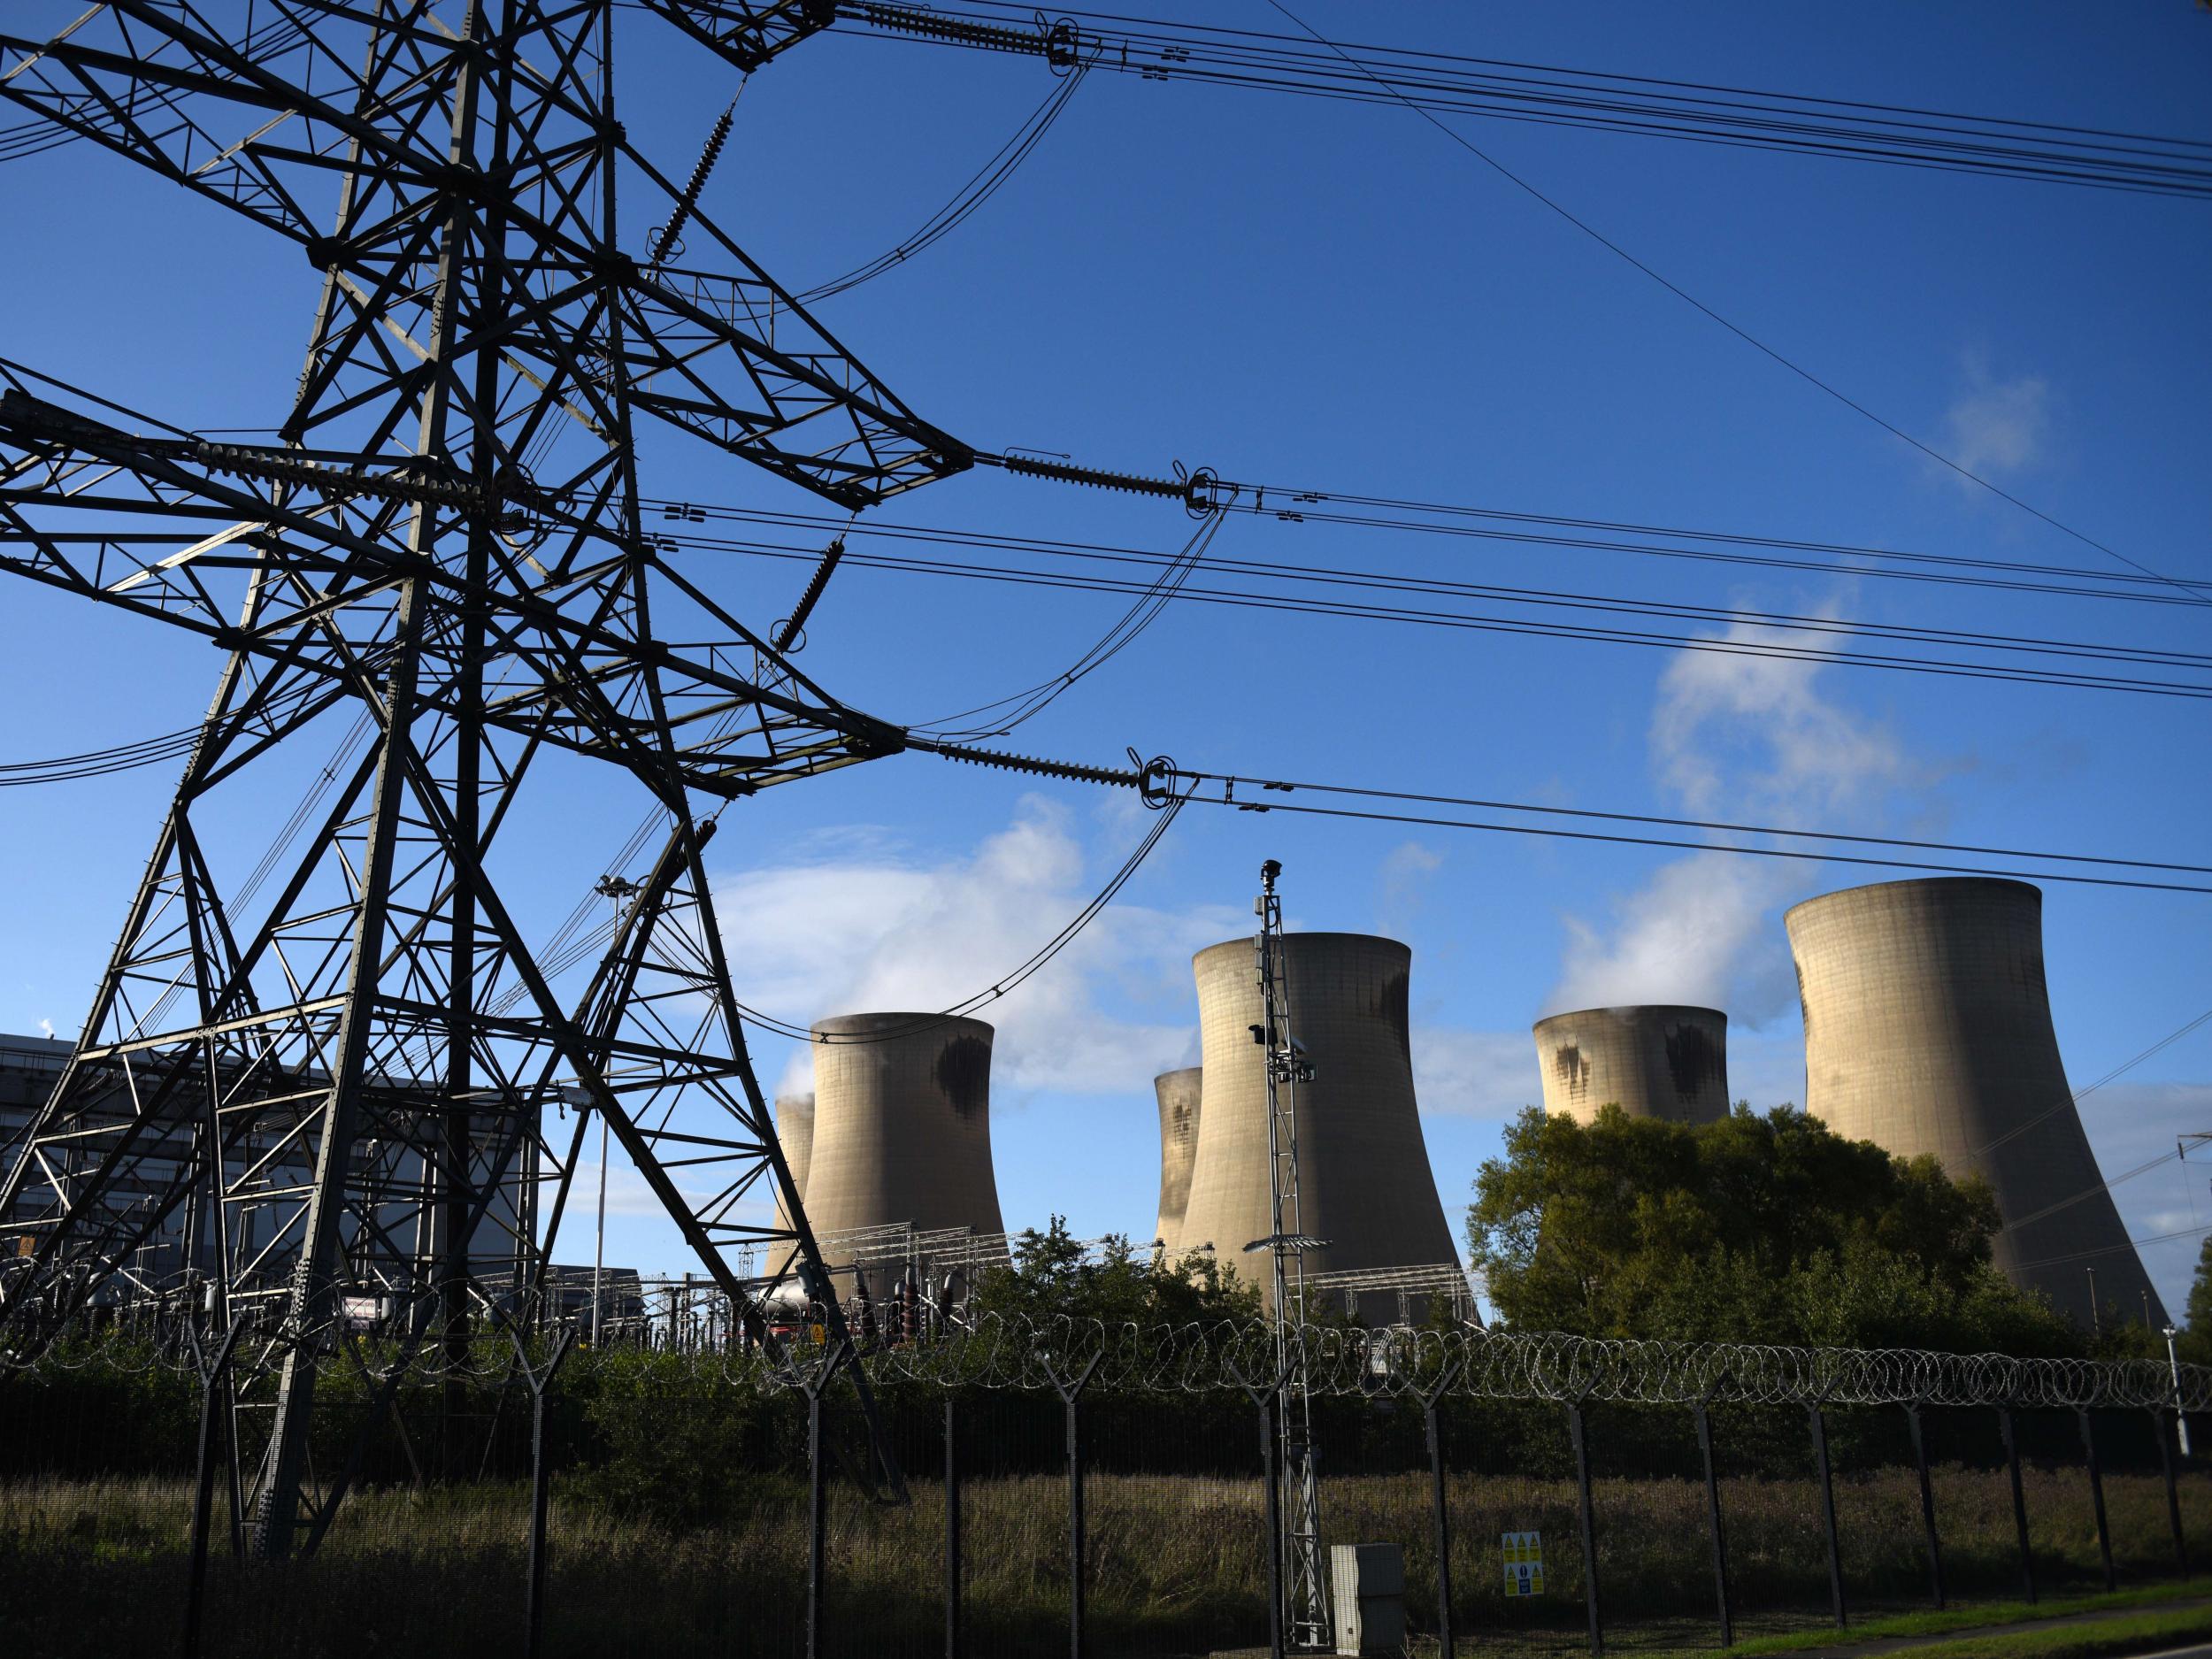 Drax wants to modify two of the coal-fired generating units at its power station near the town of Selby into a gas-powered plant